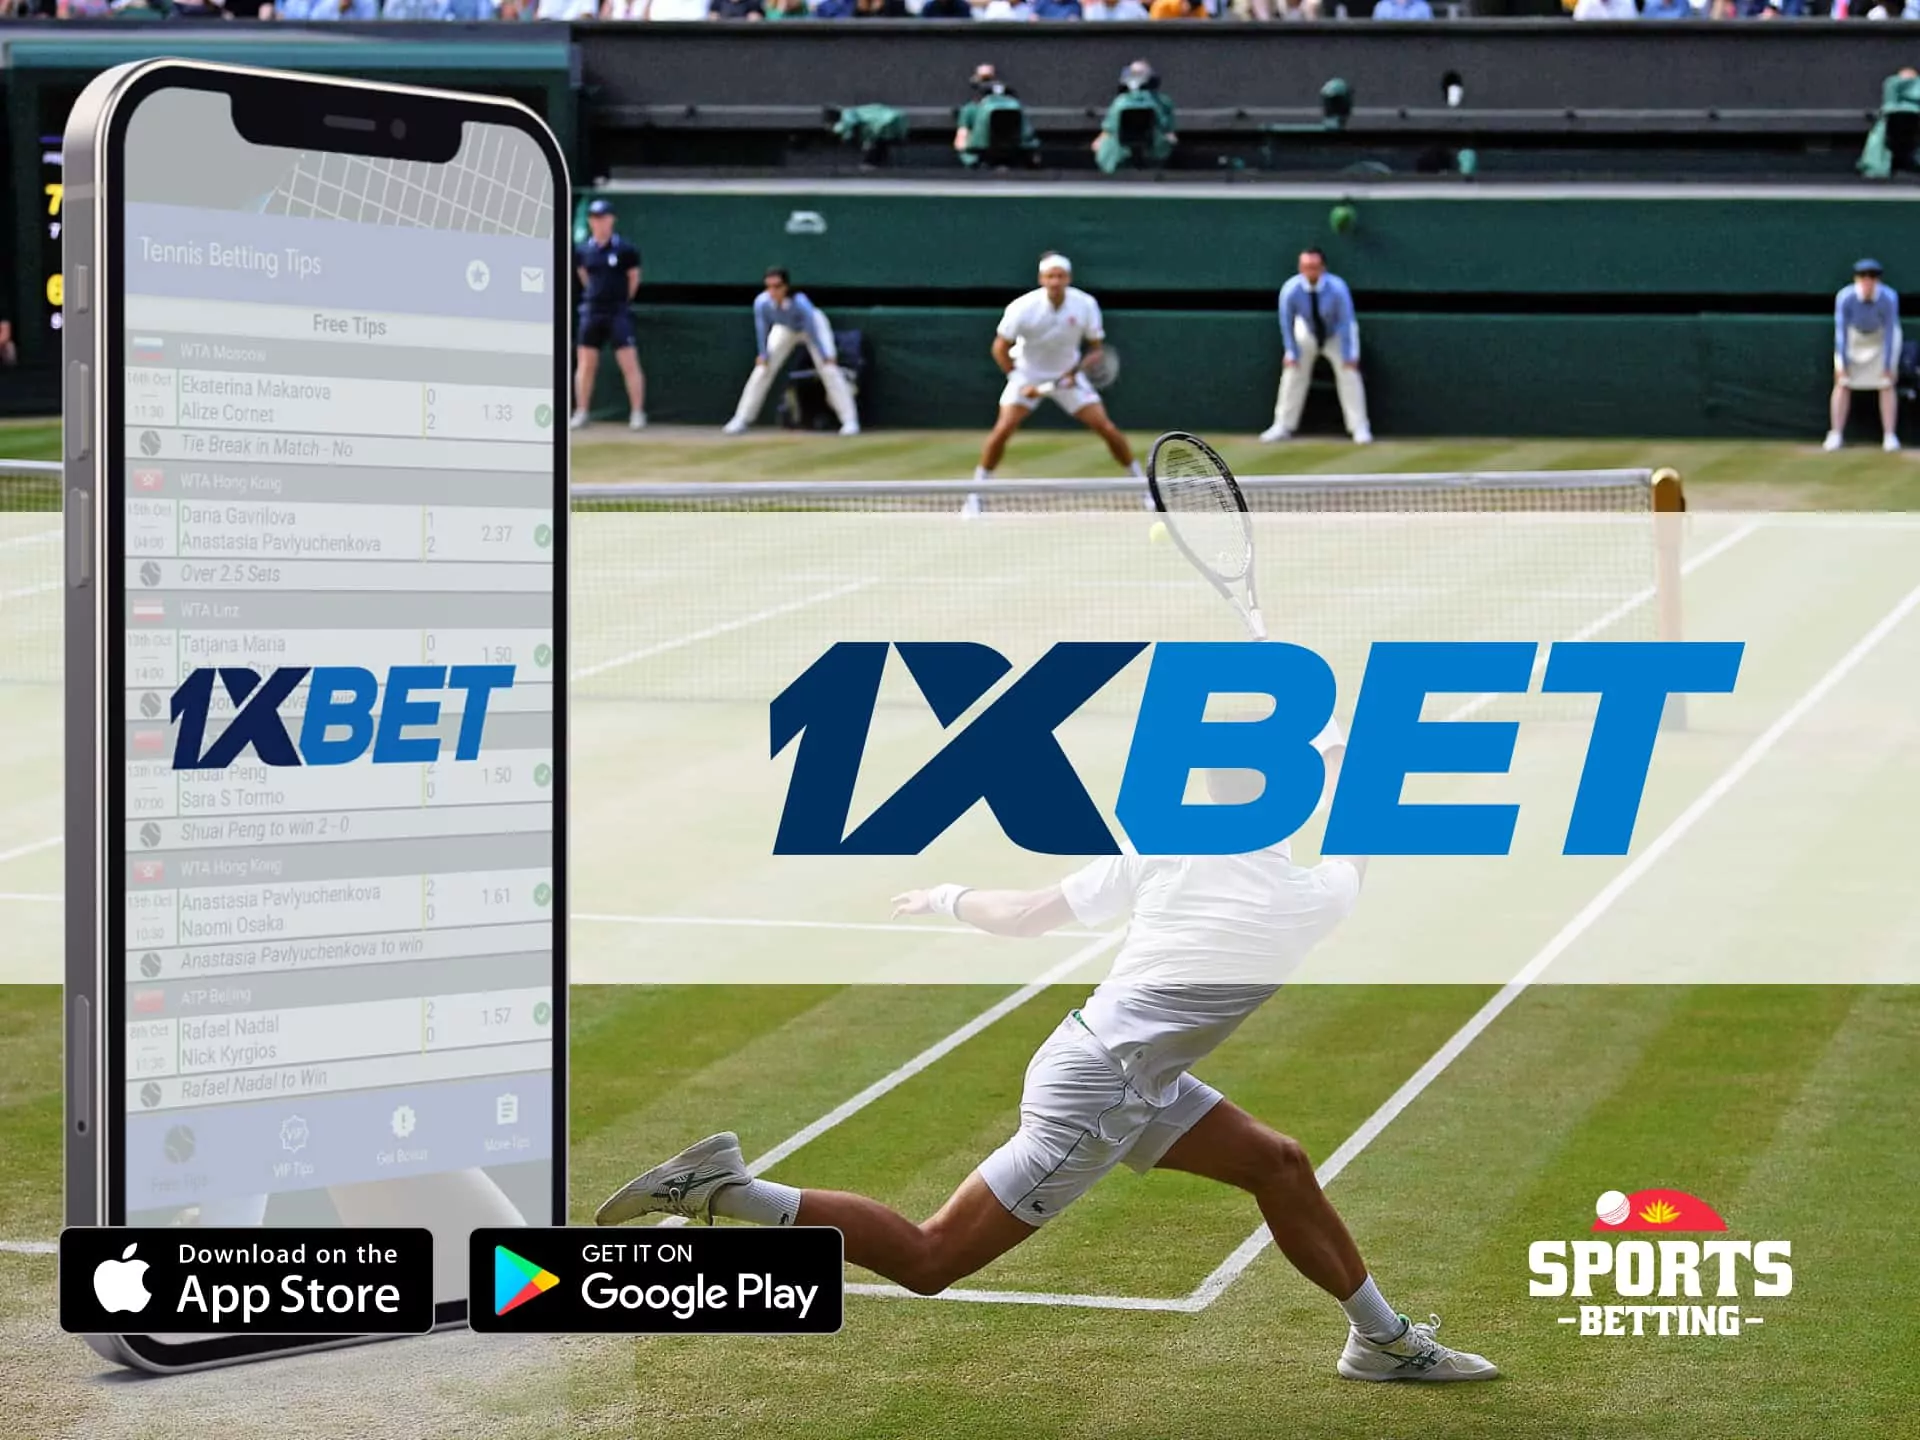 1xBet tennis betting site with a large number of deposit and withdrawal methods are available.